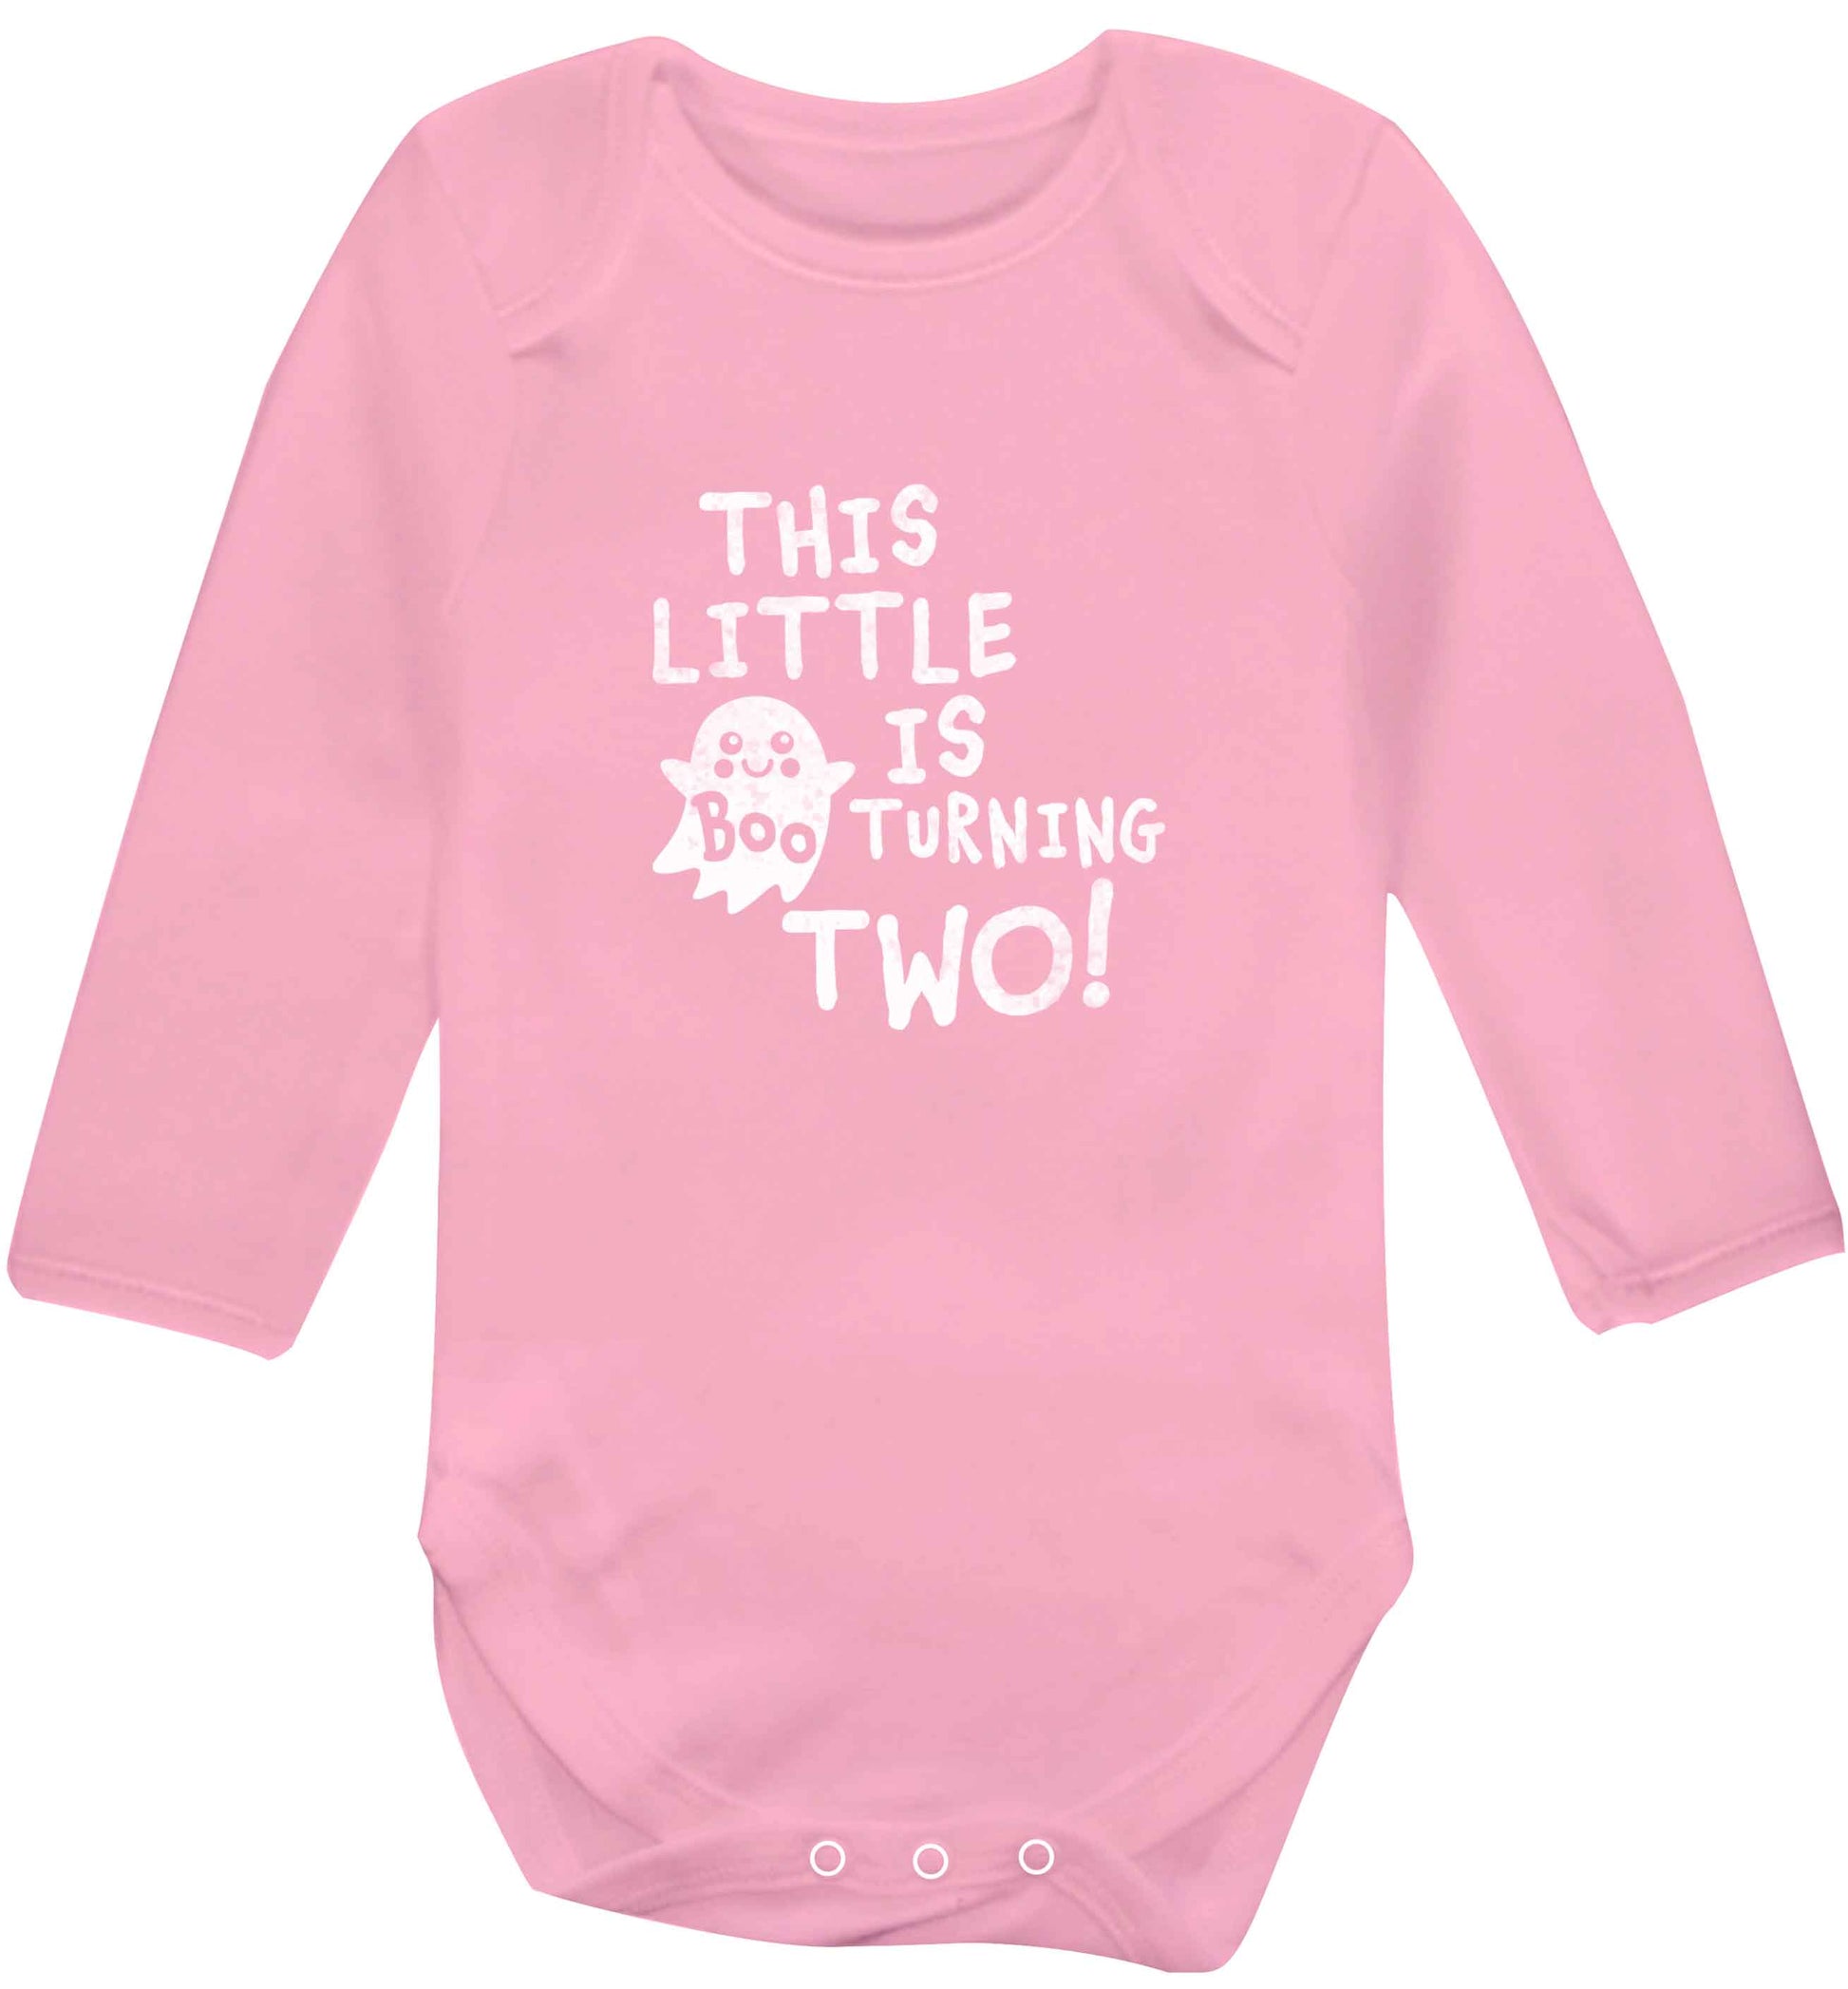 This little boo is turning two baby vest long sleeved pale pink 6-12 months